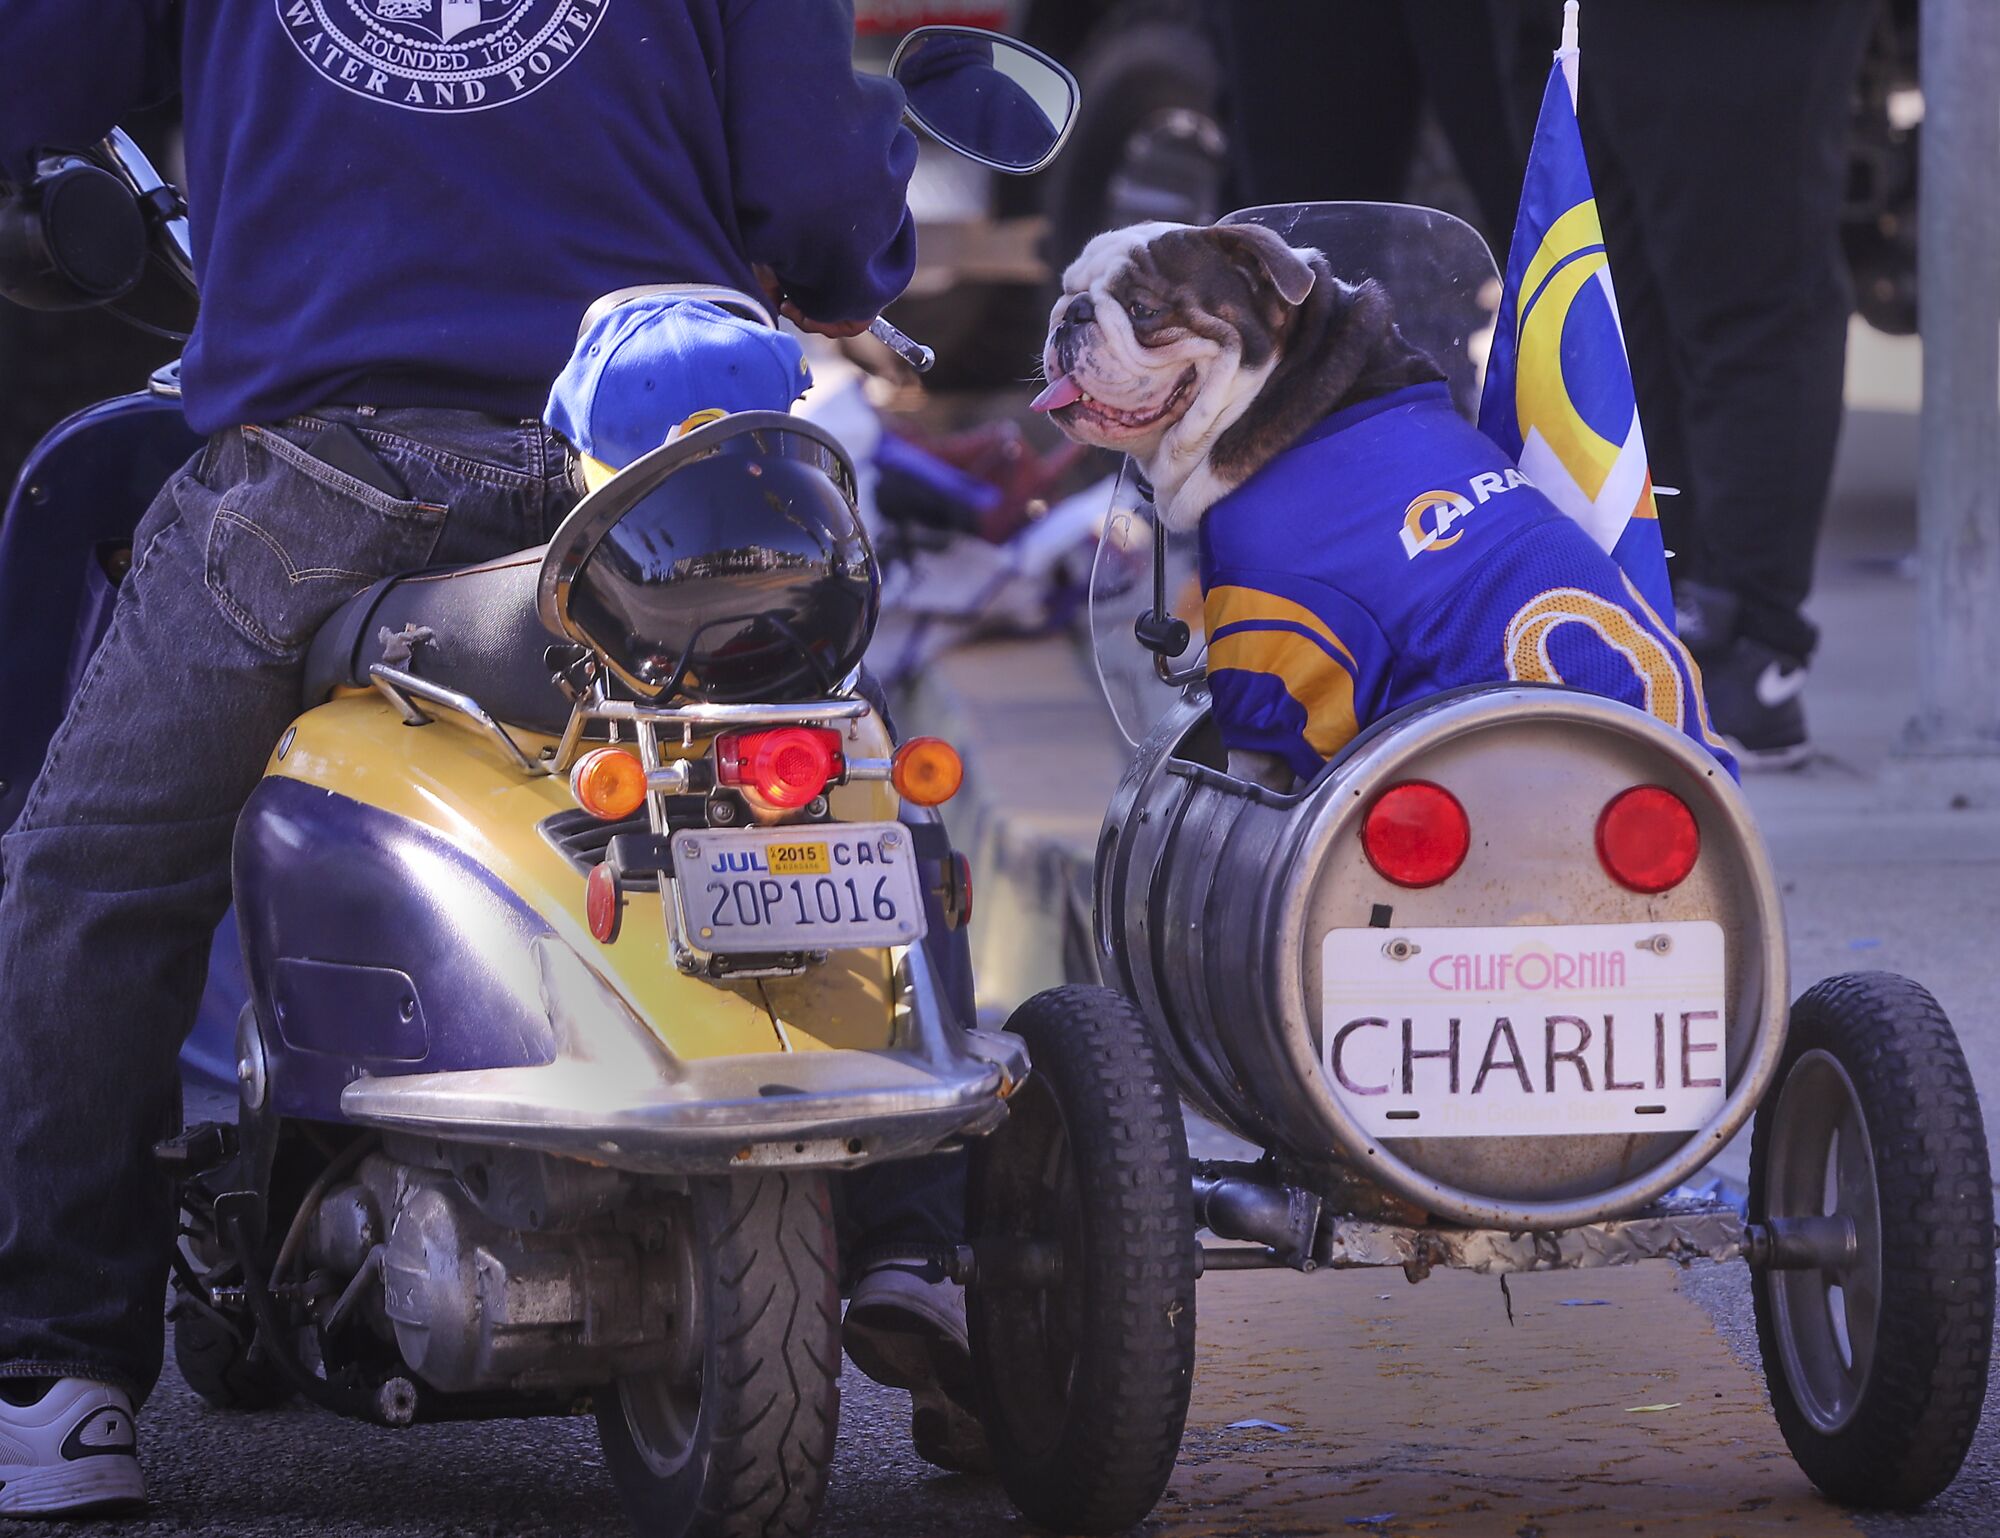 Charlie rides in a LA Rams fan's sidecar as they celebrate the Los Angeles Rams Super Bowl parade and rally in Los Angeles.